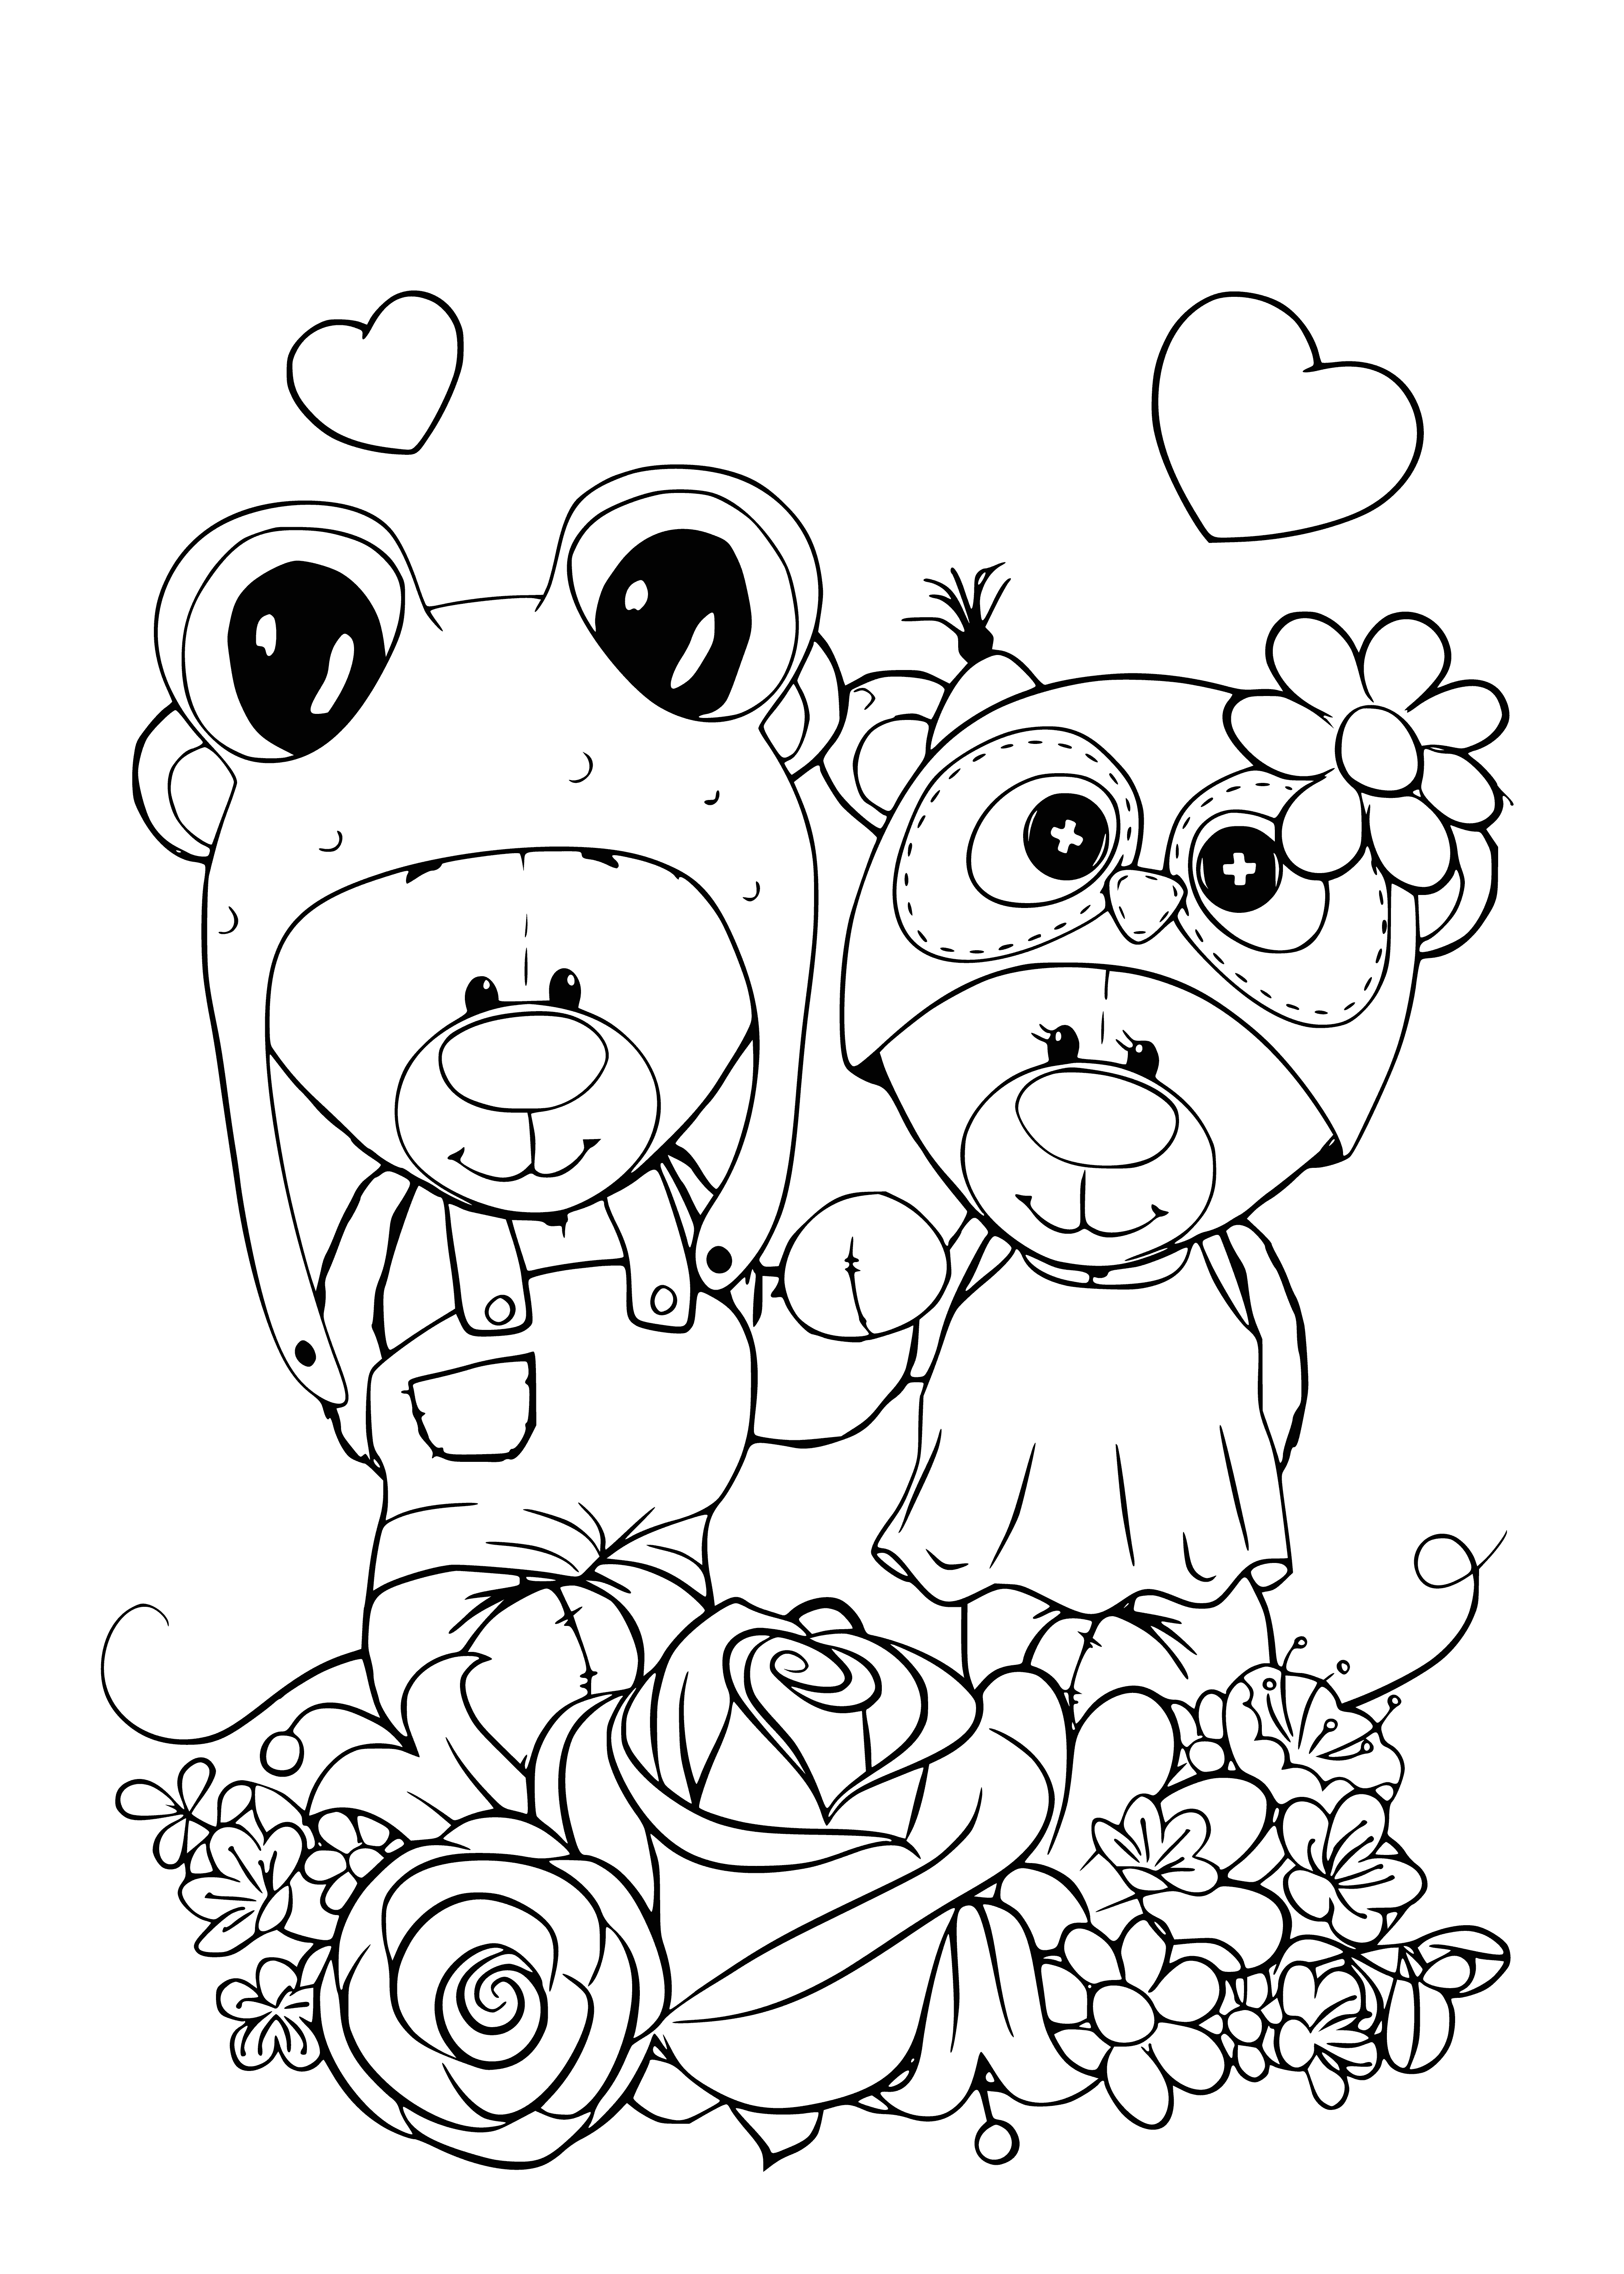 coloring page: Two happy teddy bears stand hand-in-hand, smiling, surrounded by hearts. #teddybears #love